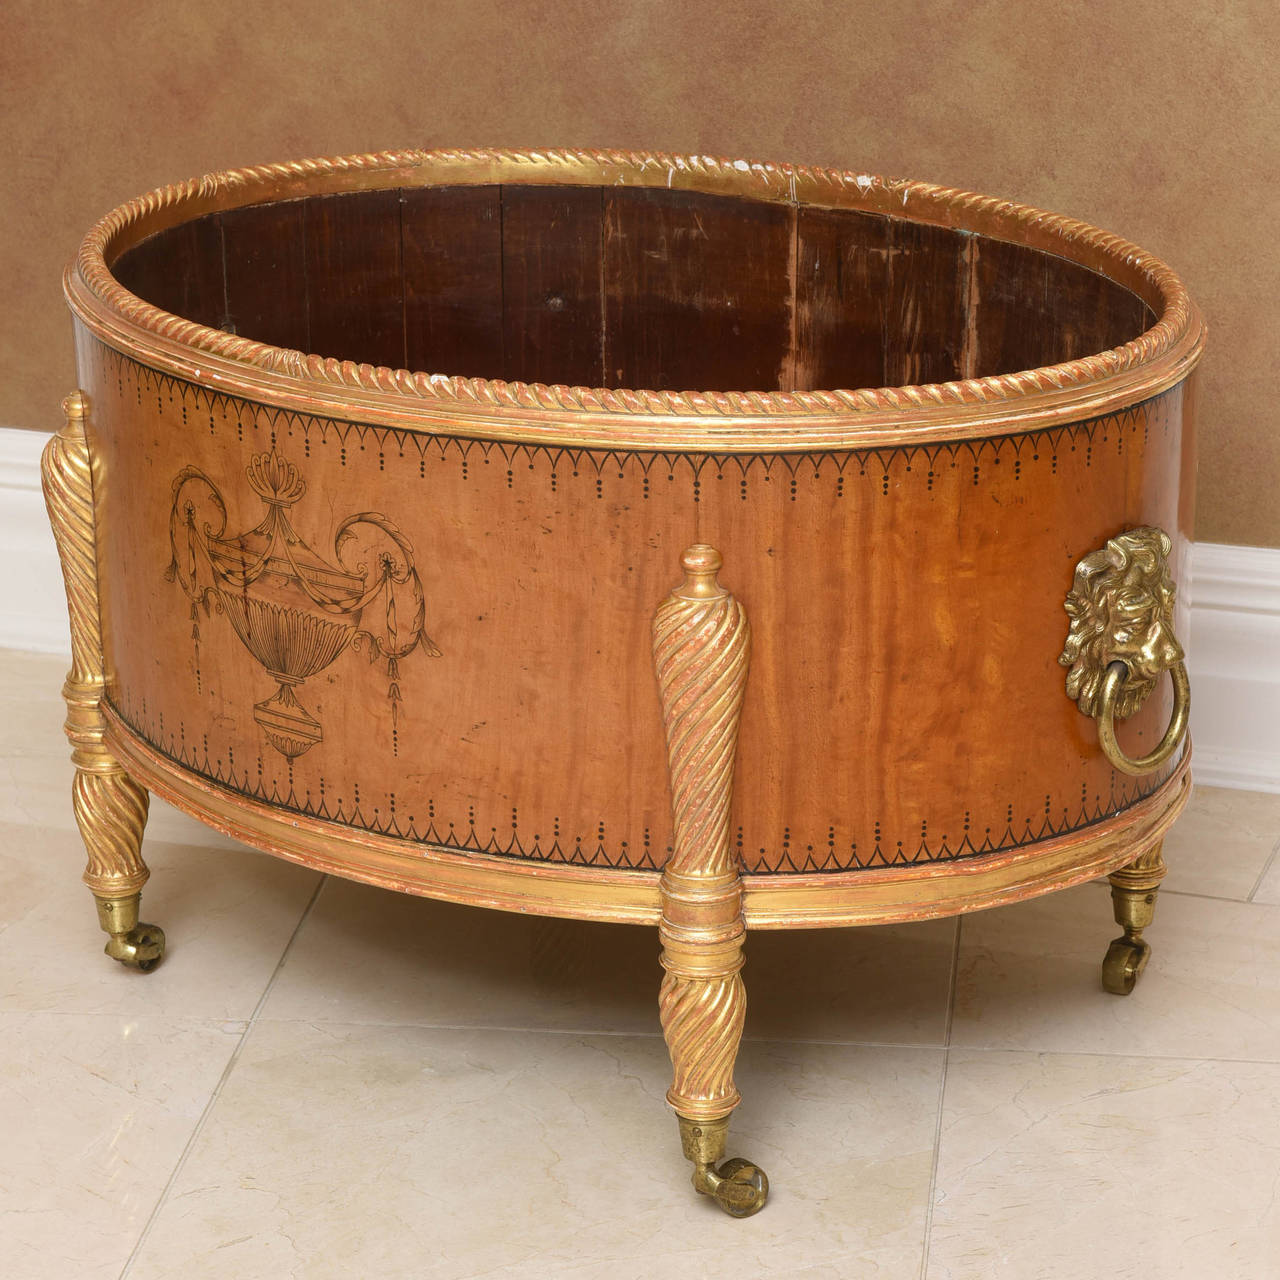 Of oval form with gilt gadrooned edge over a finely etched classical urn; with gilt-metal lion mask handles to the sides; raised on gilt spiral-fluted legs terminating in brass caps and casters; retaining aluminum lining.

Spectacular filled with